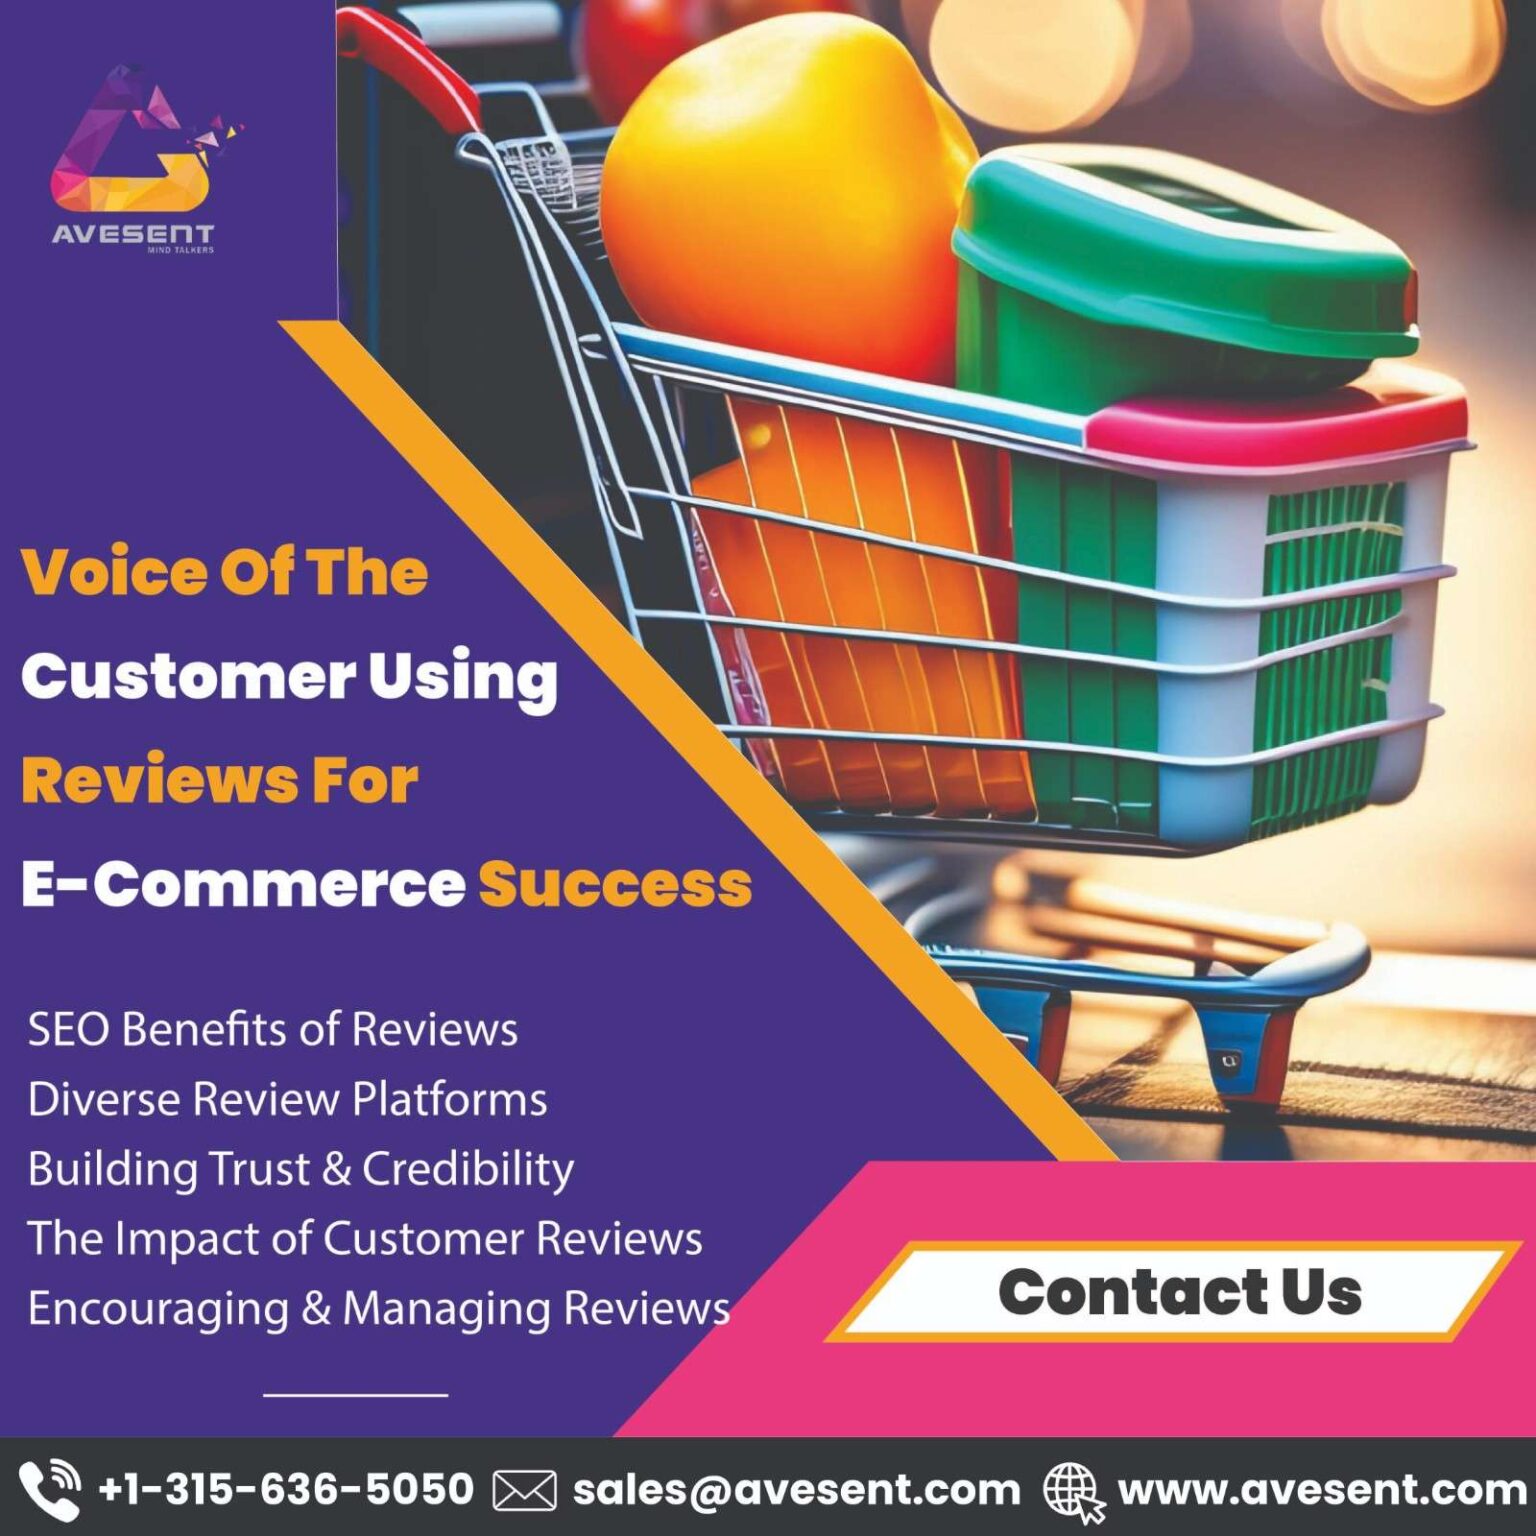 You are currently viewing “Voice of the Customer: Using Reviews for E-commerce Success”